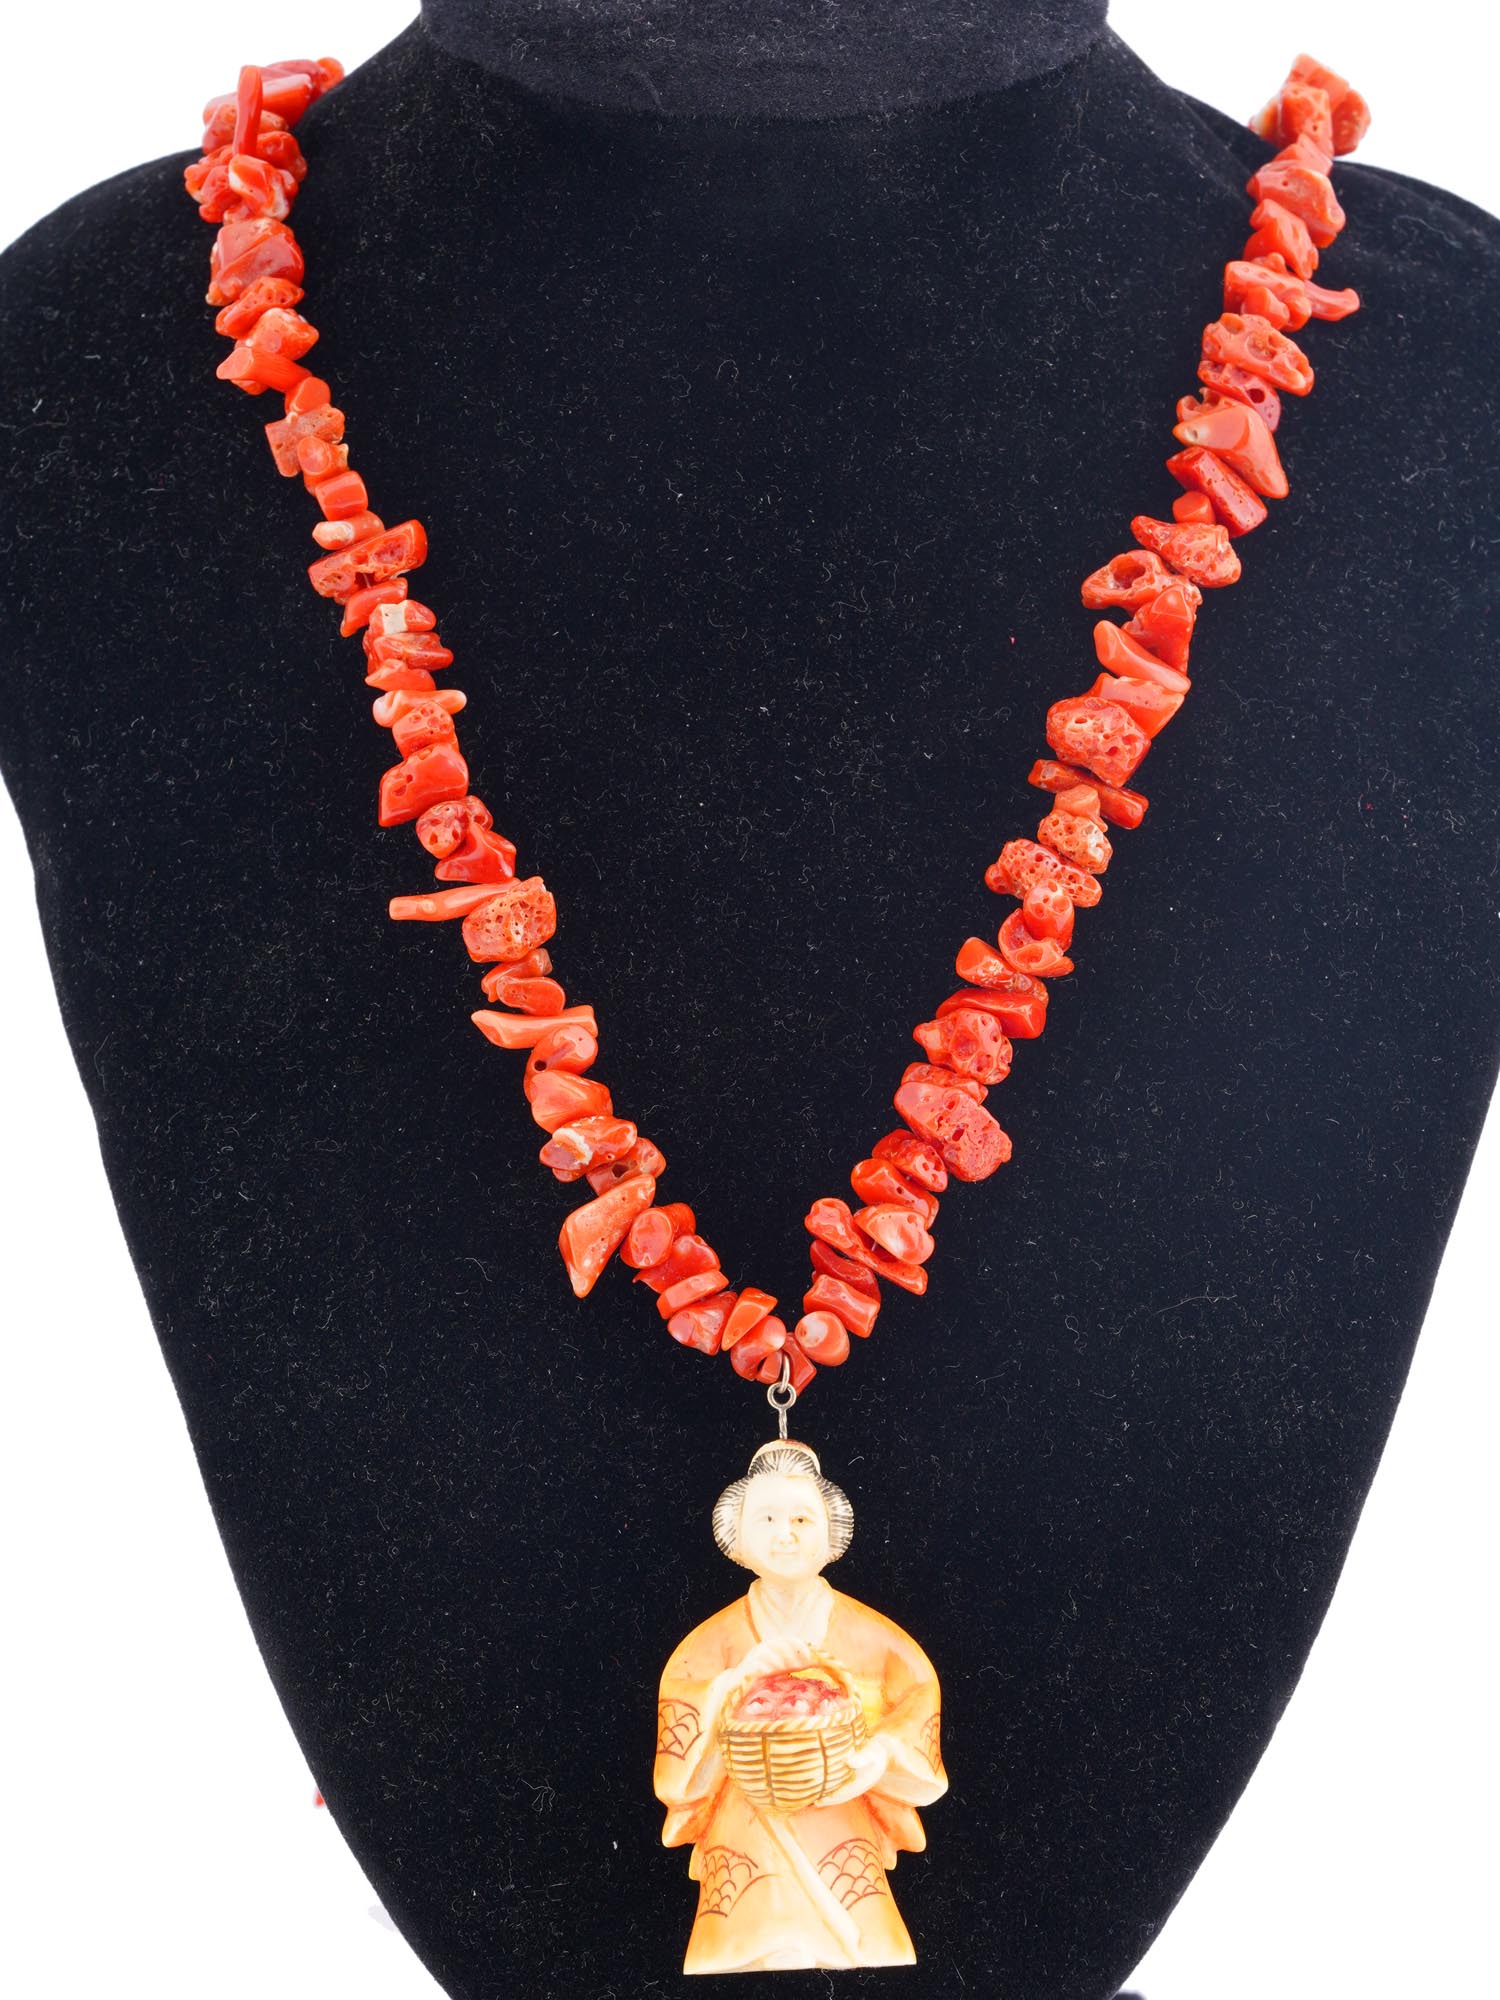 CHINESE RED CORAL NECKLACE WITH CARVED PENDANT PIC-0